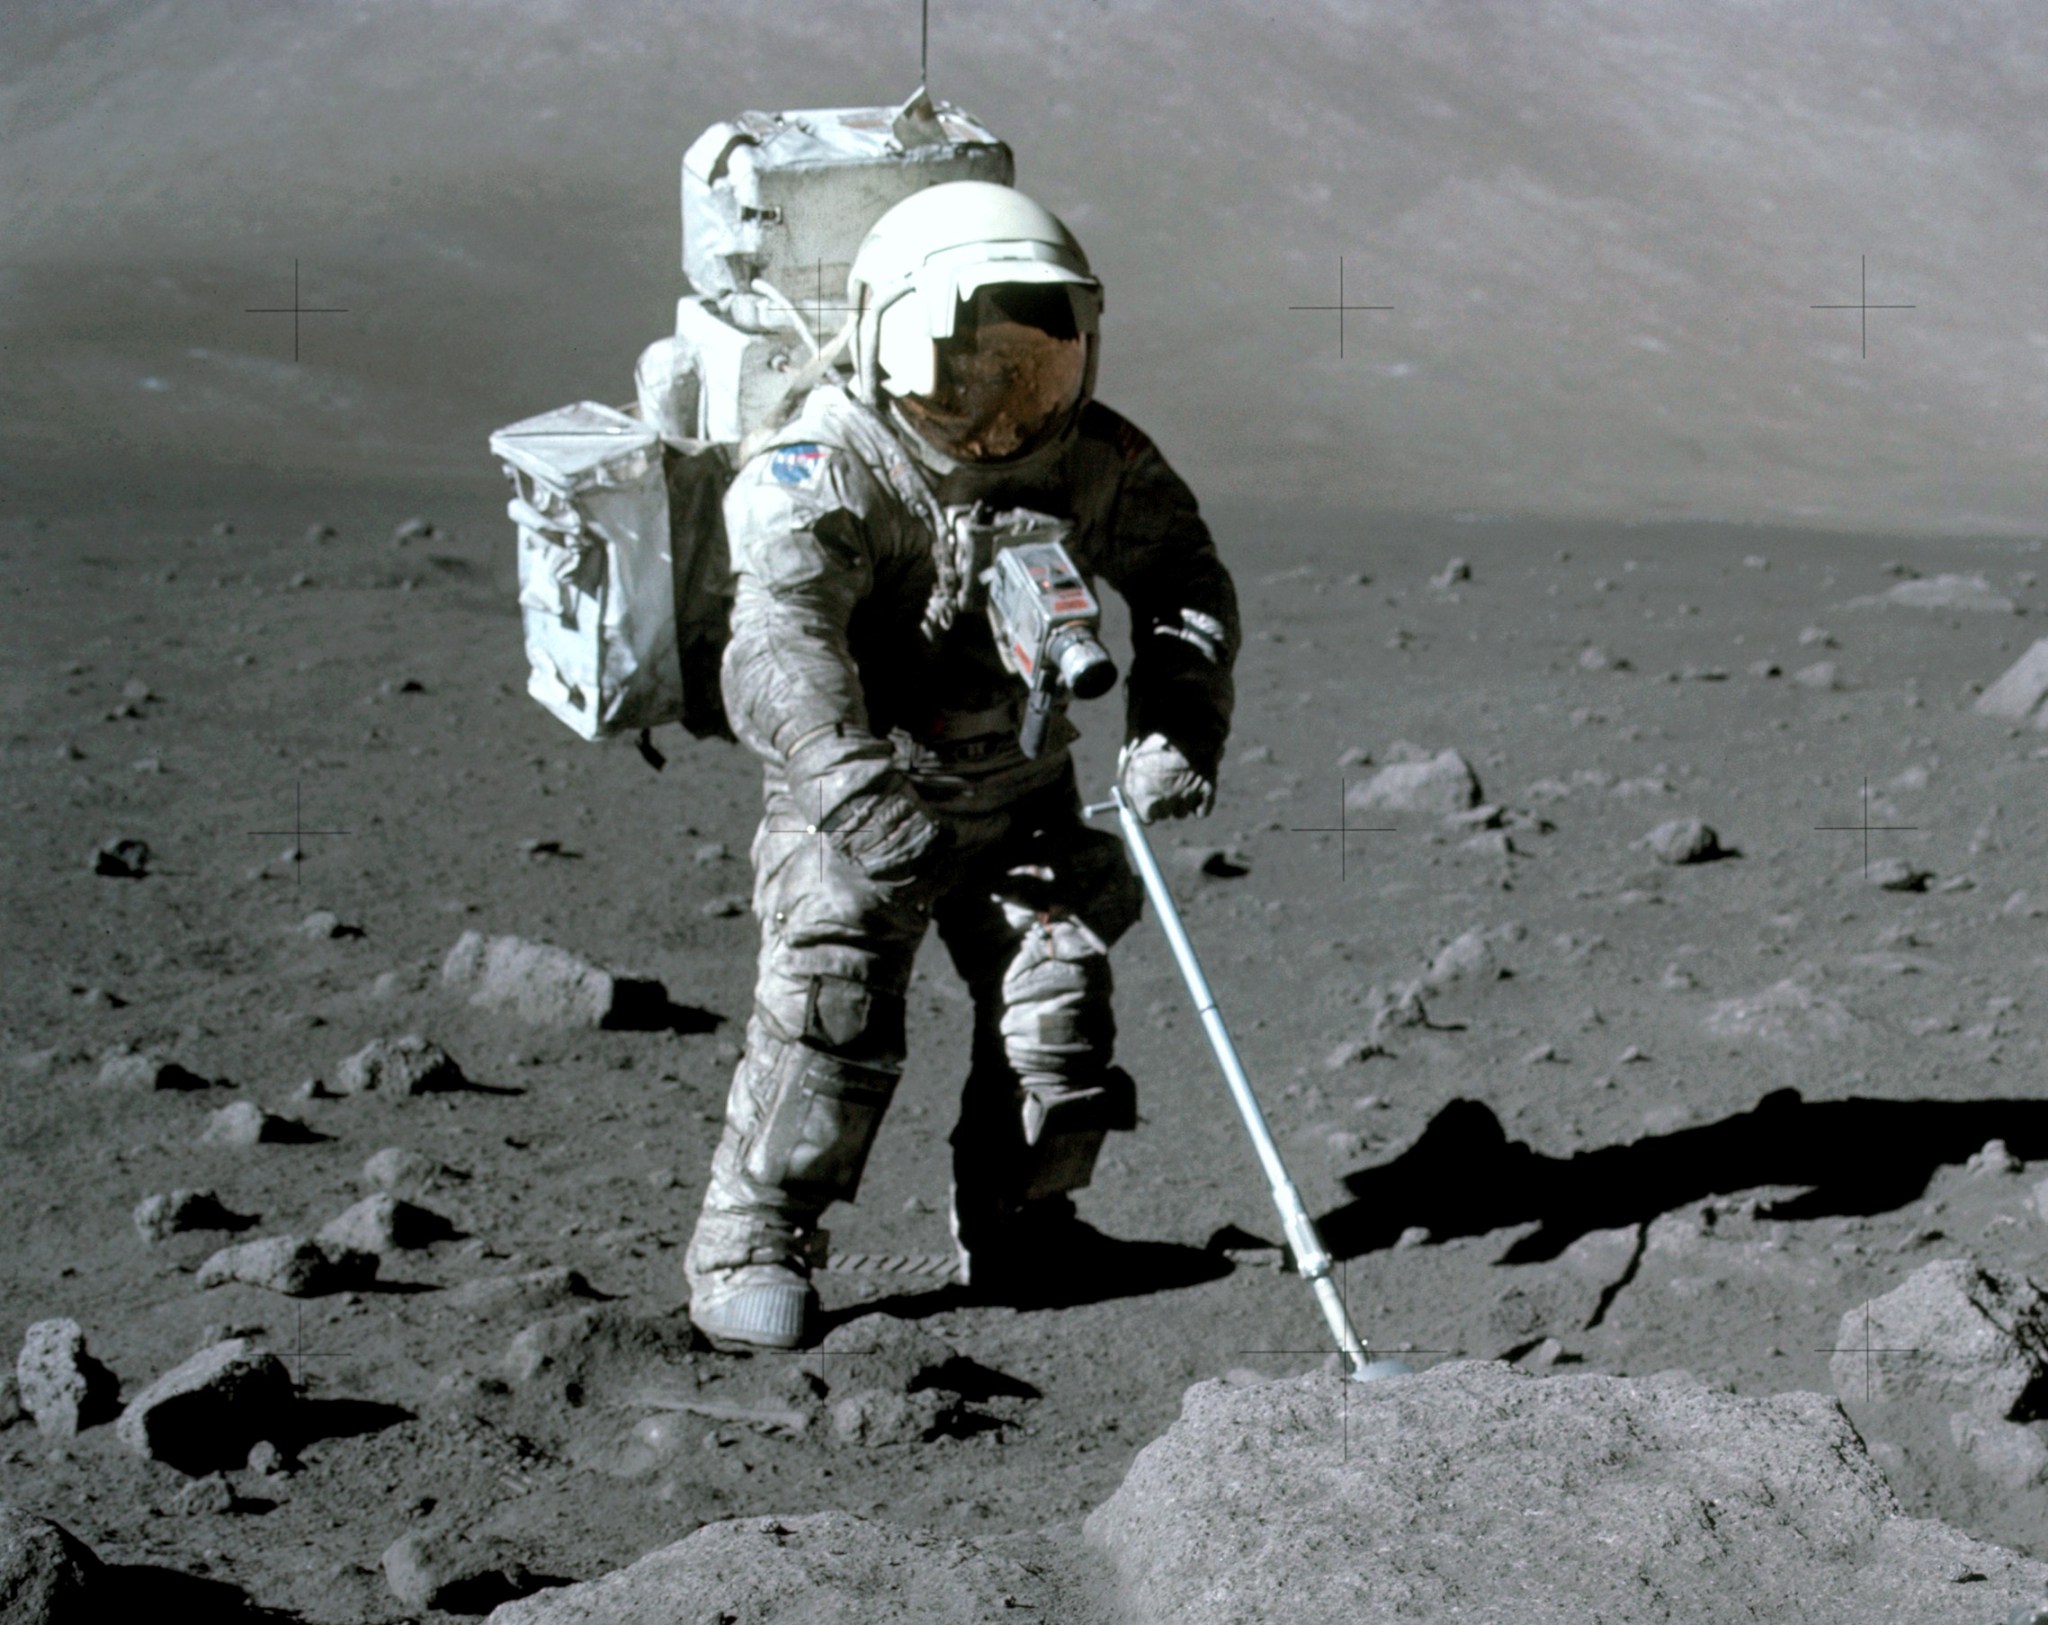 Apollo 17 lunar module pilot Harrison Schmitt uses an adjustable sampling scoop to retrieve lunar samples during the second Apollo 17 moon walk. His spacesuit is covered with a layer of the lunar dust.